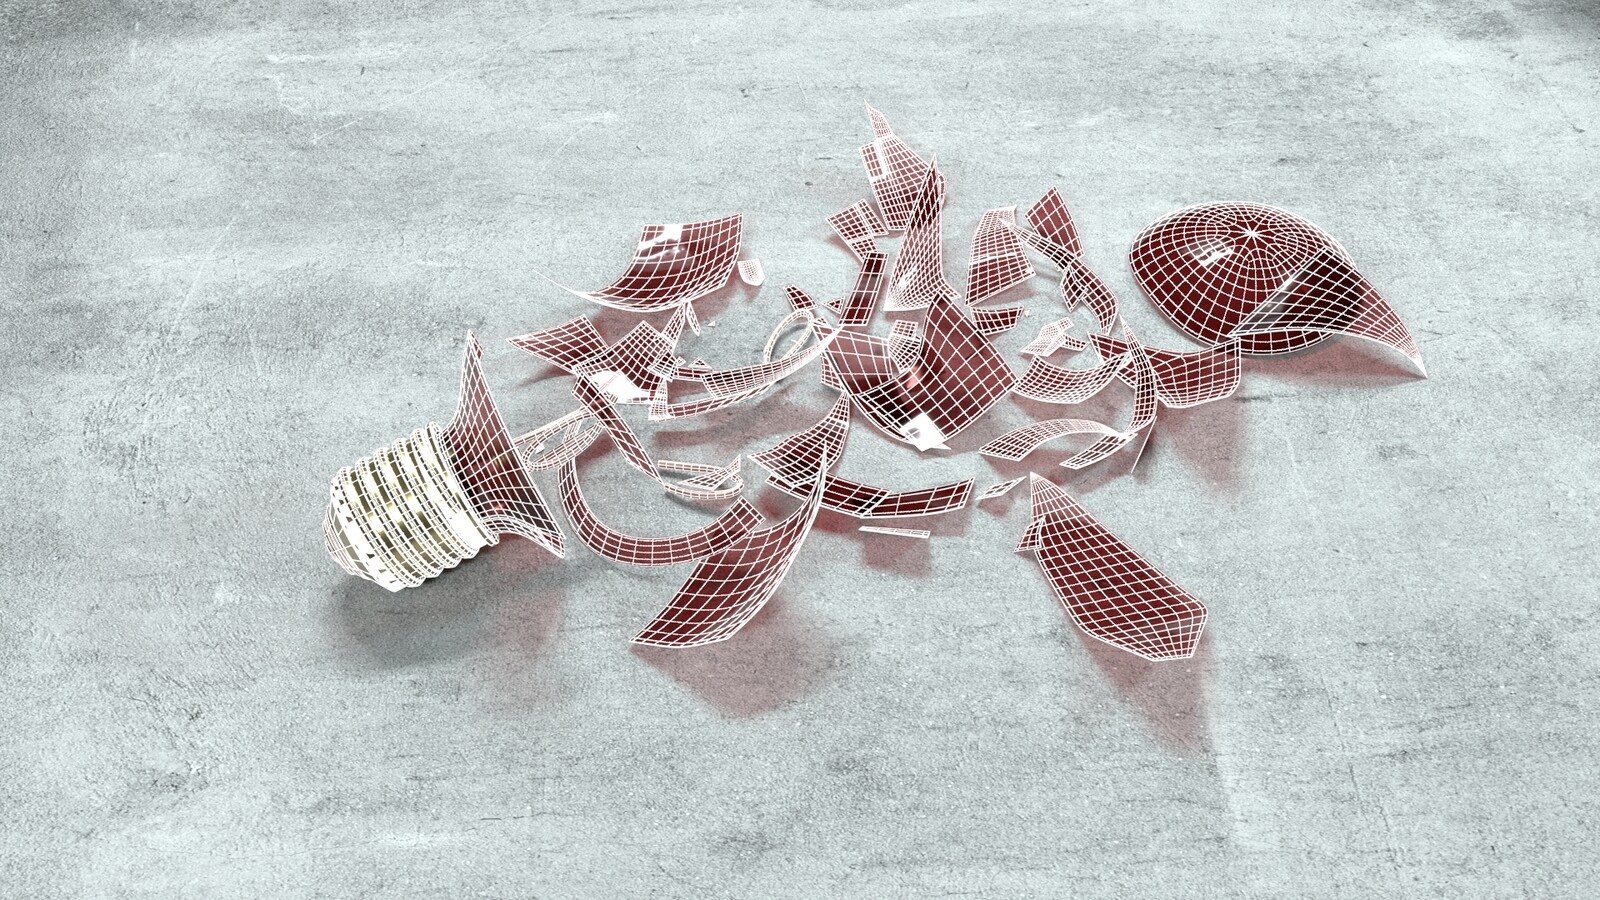 A still frame render of the wireframe of the Light Bulb